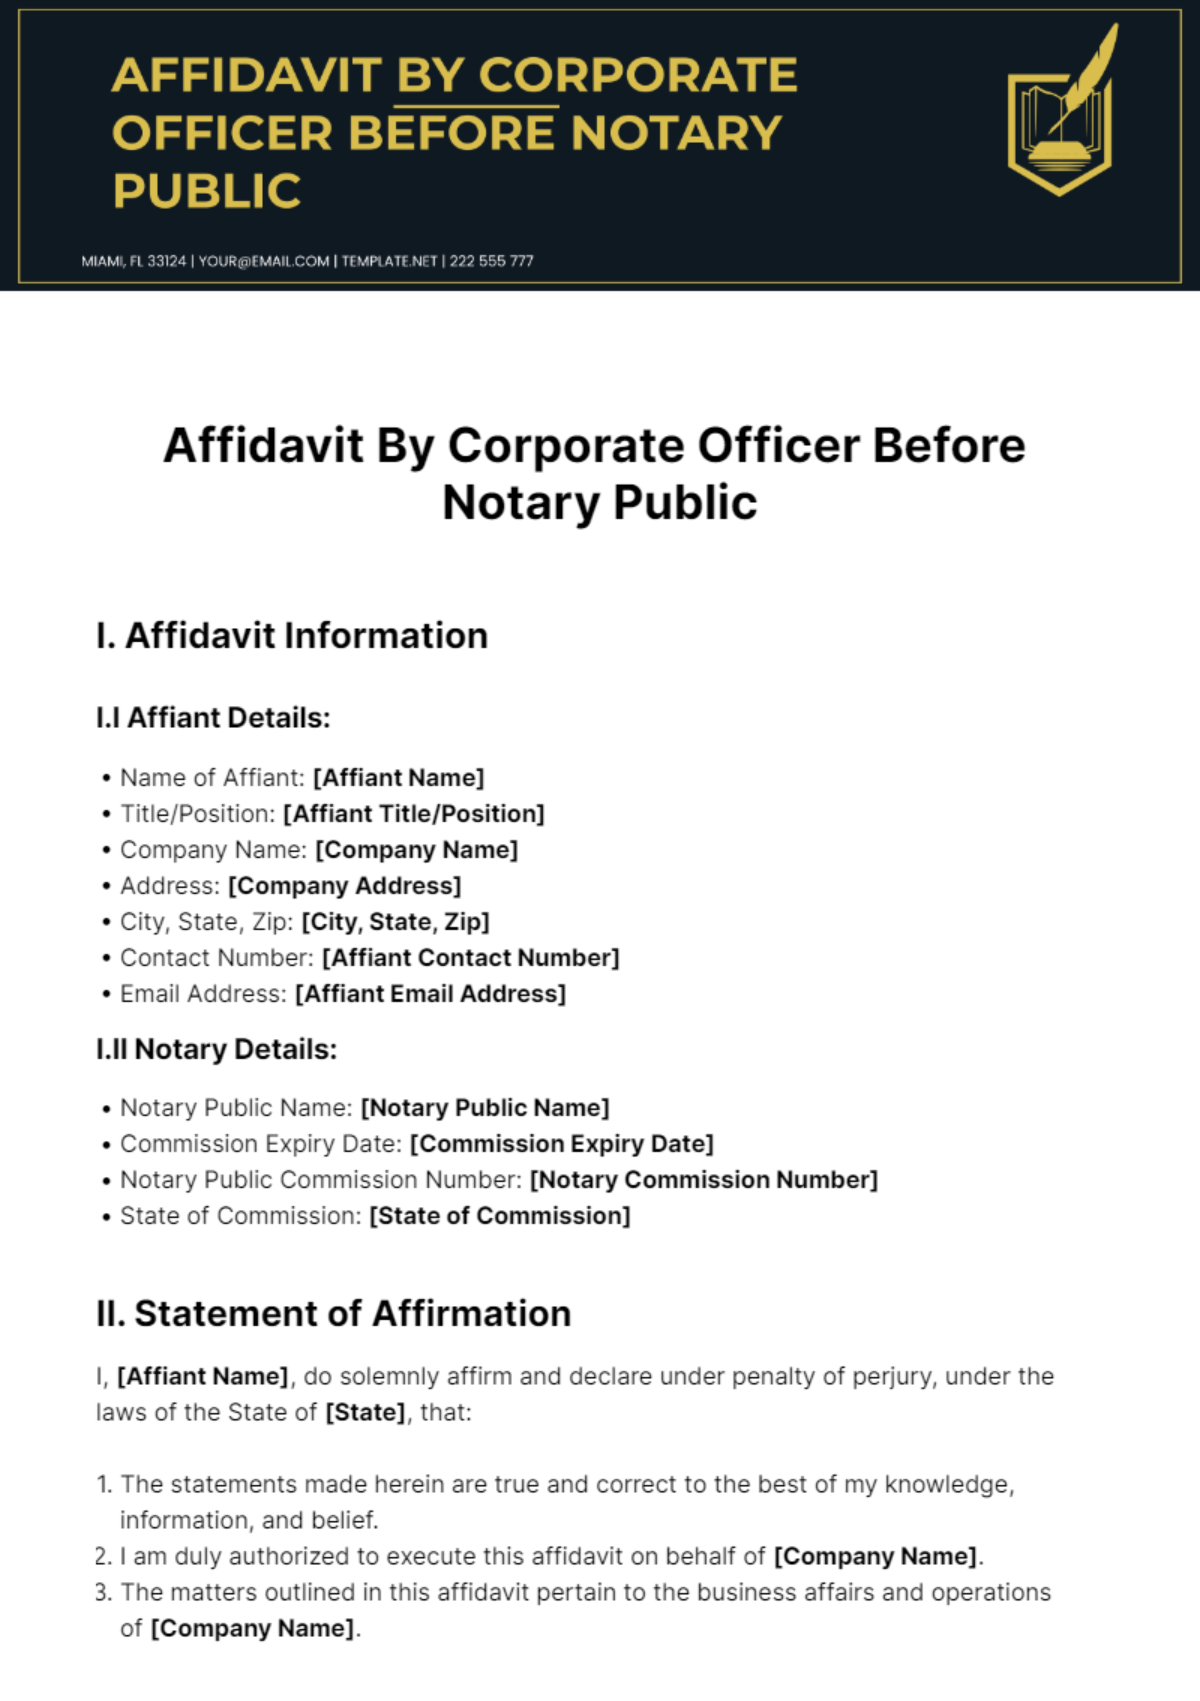 Affidavit By Corporate Officer Before Notary Public Template